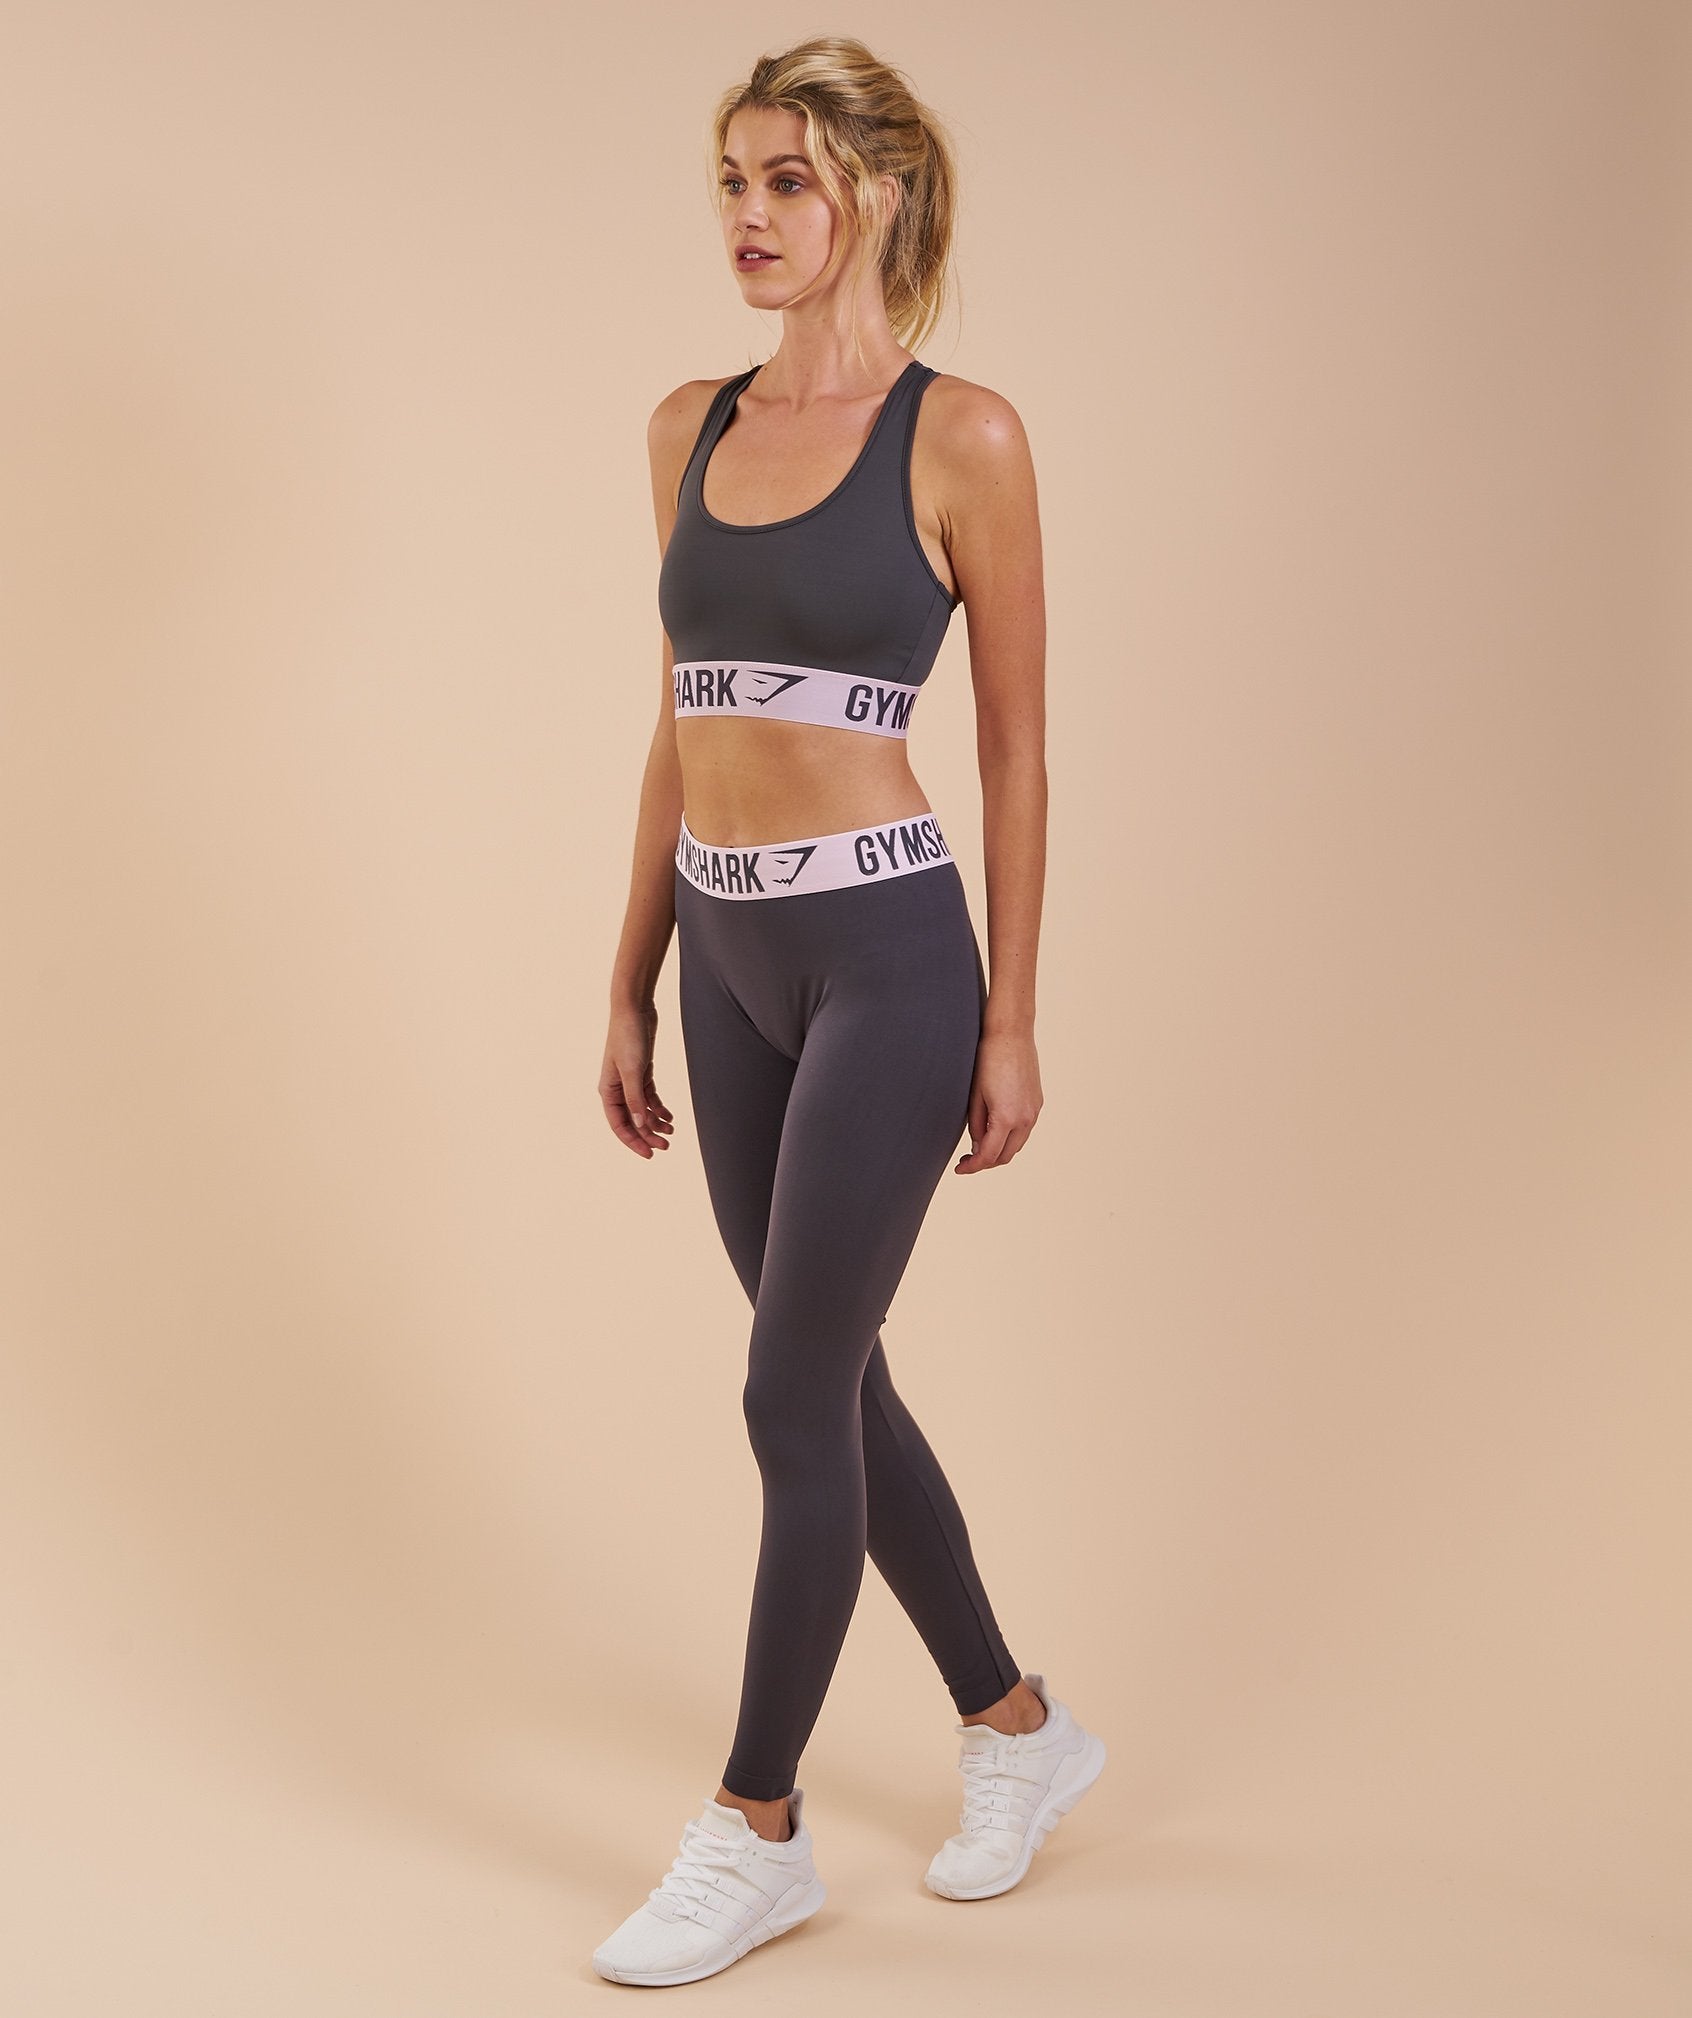 Fit Sports Bra in Charcoal/Chalk Pink - view 3